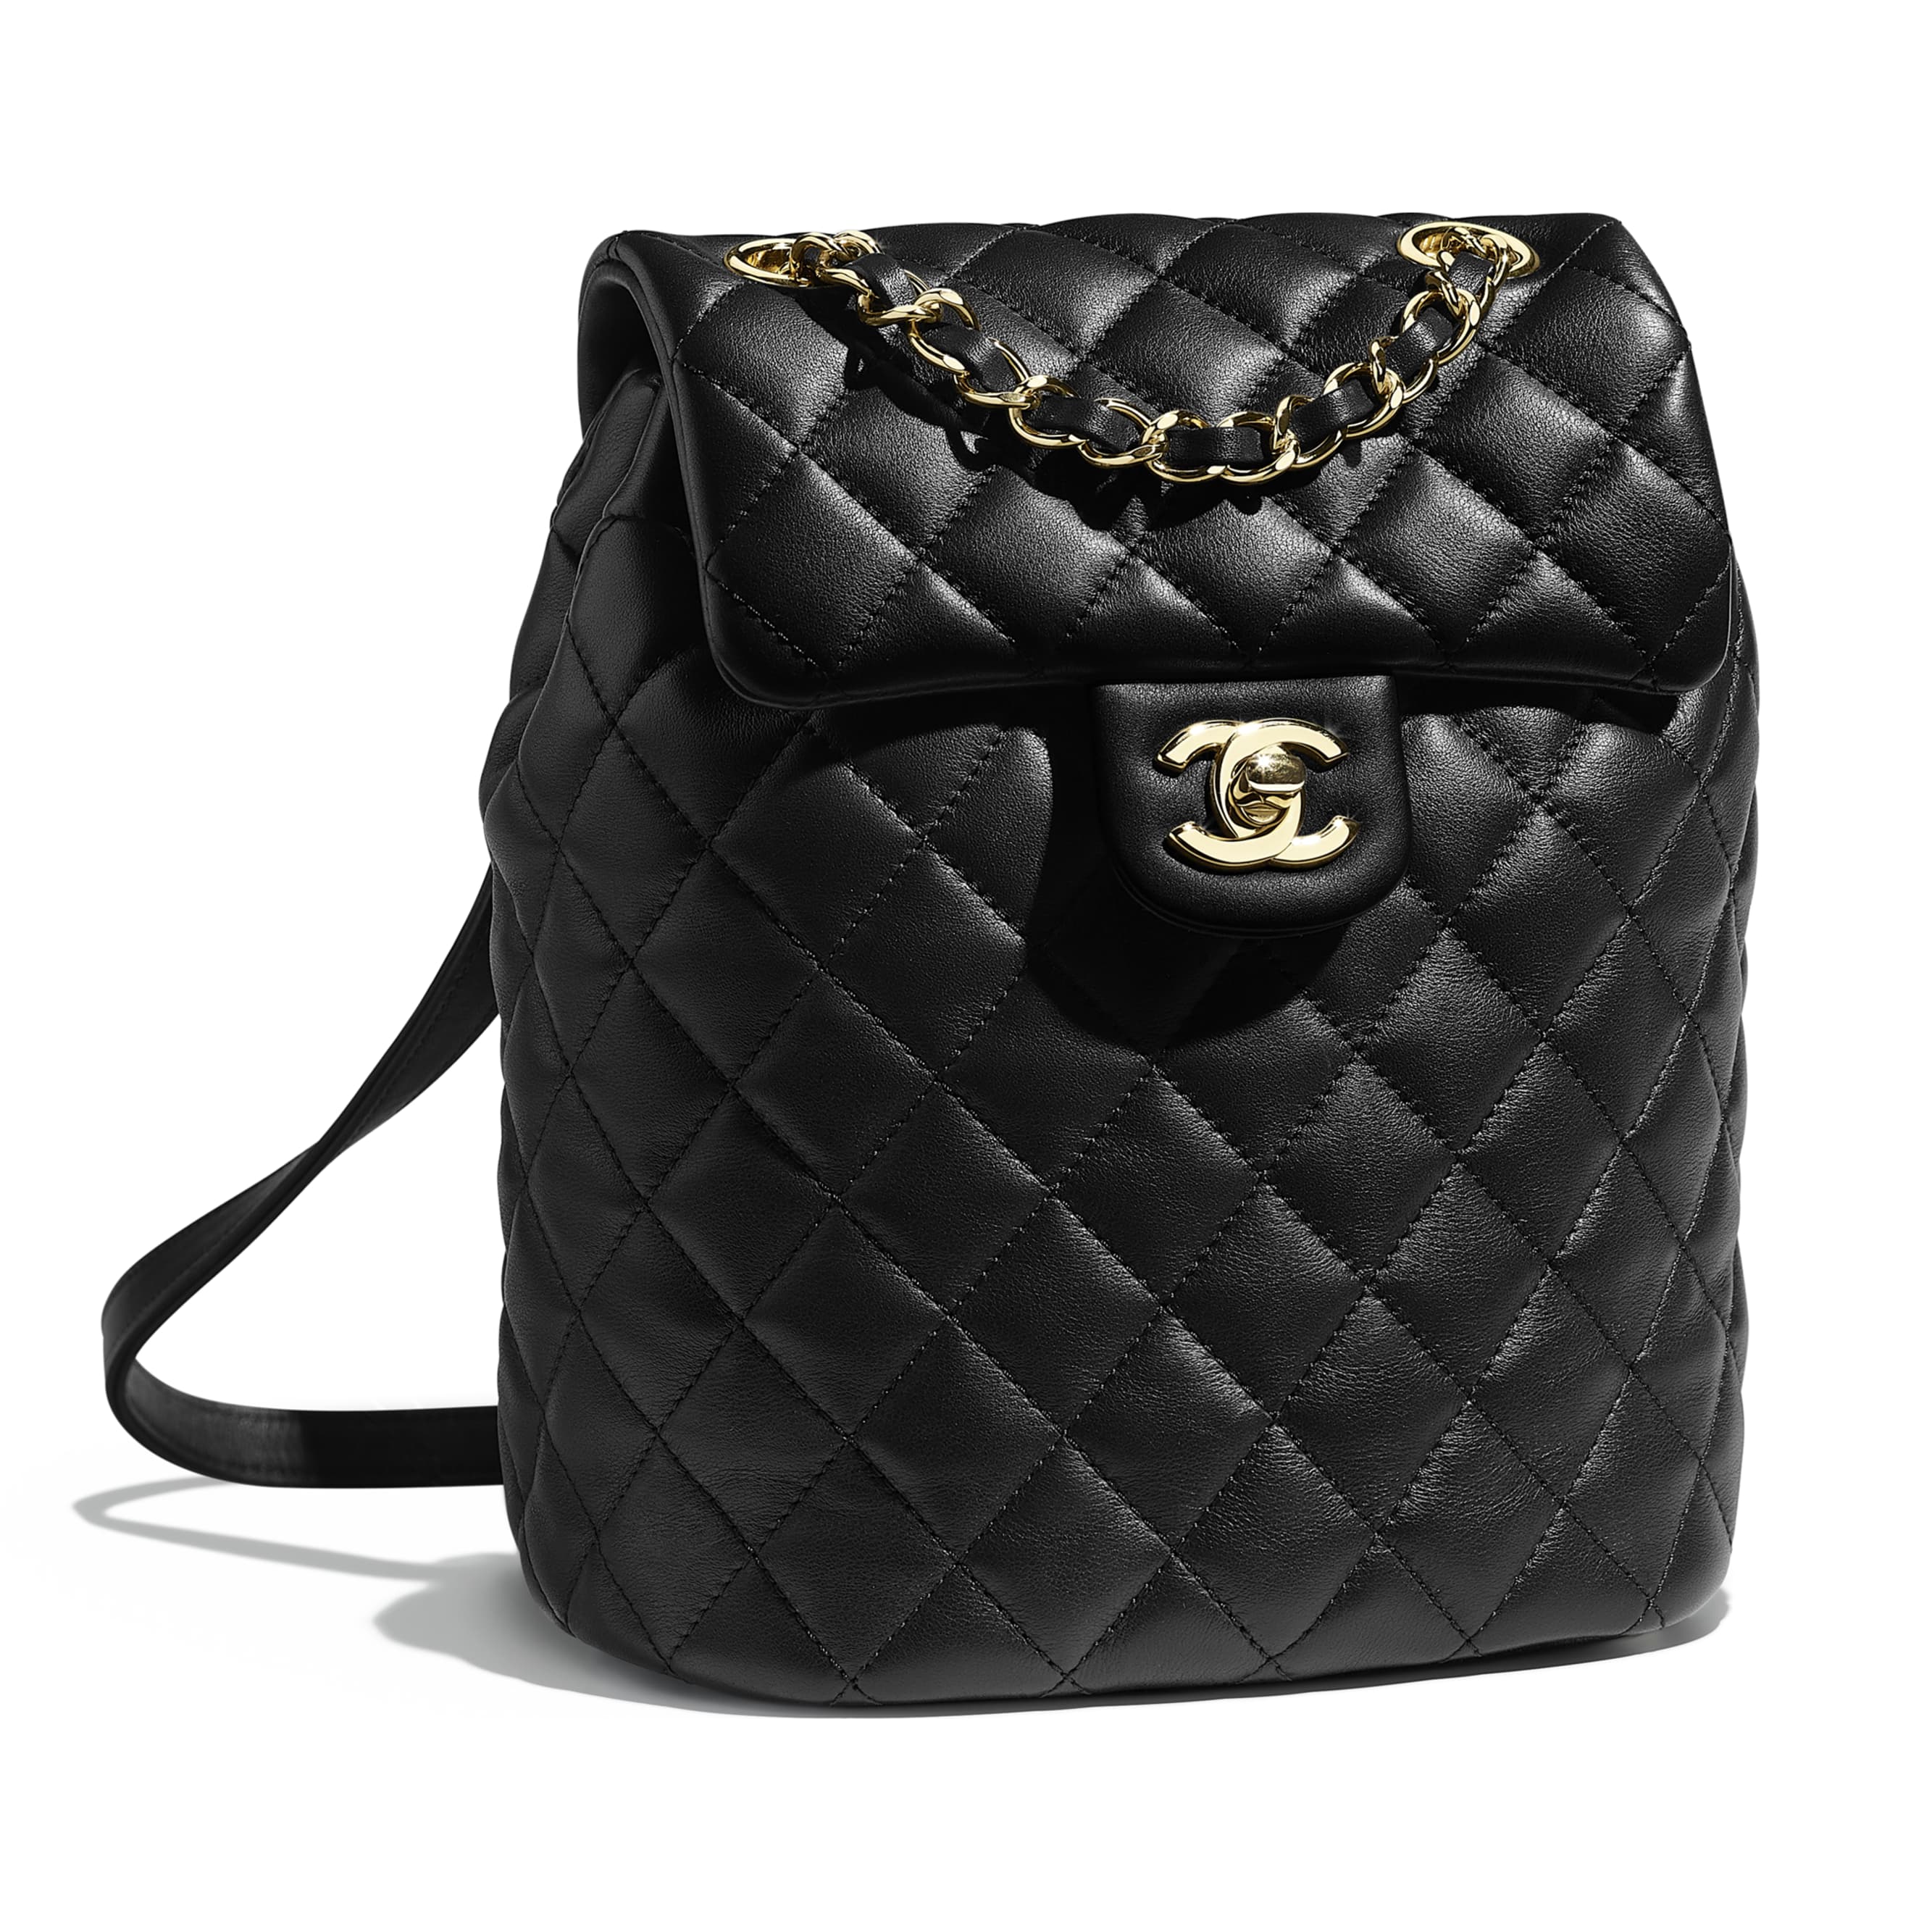 Balo Nữ Chanel Small Backpack Grained Shiny Black AS3787B1018494305   LUXITY